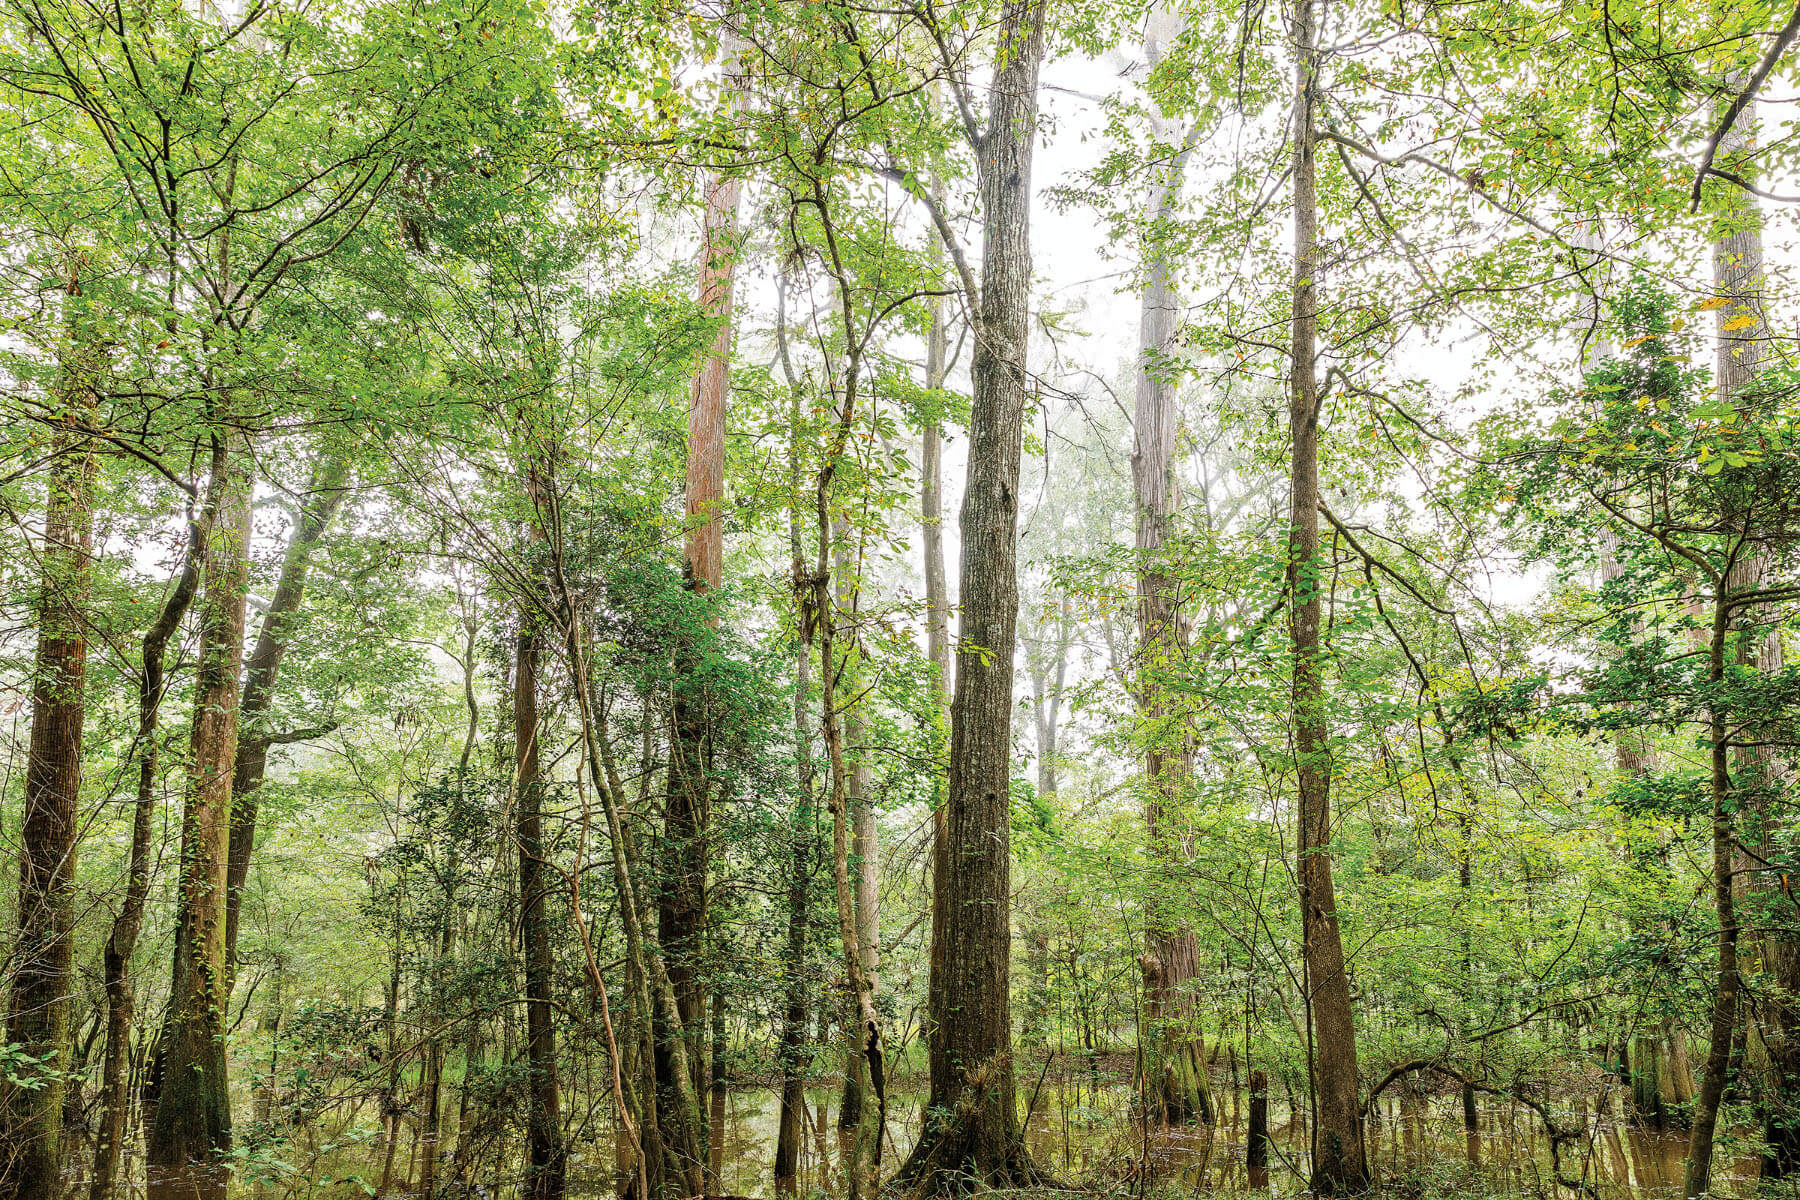 Tall green trees in Big Thicket